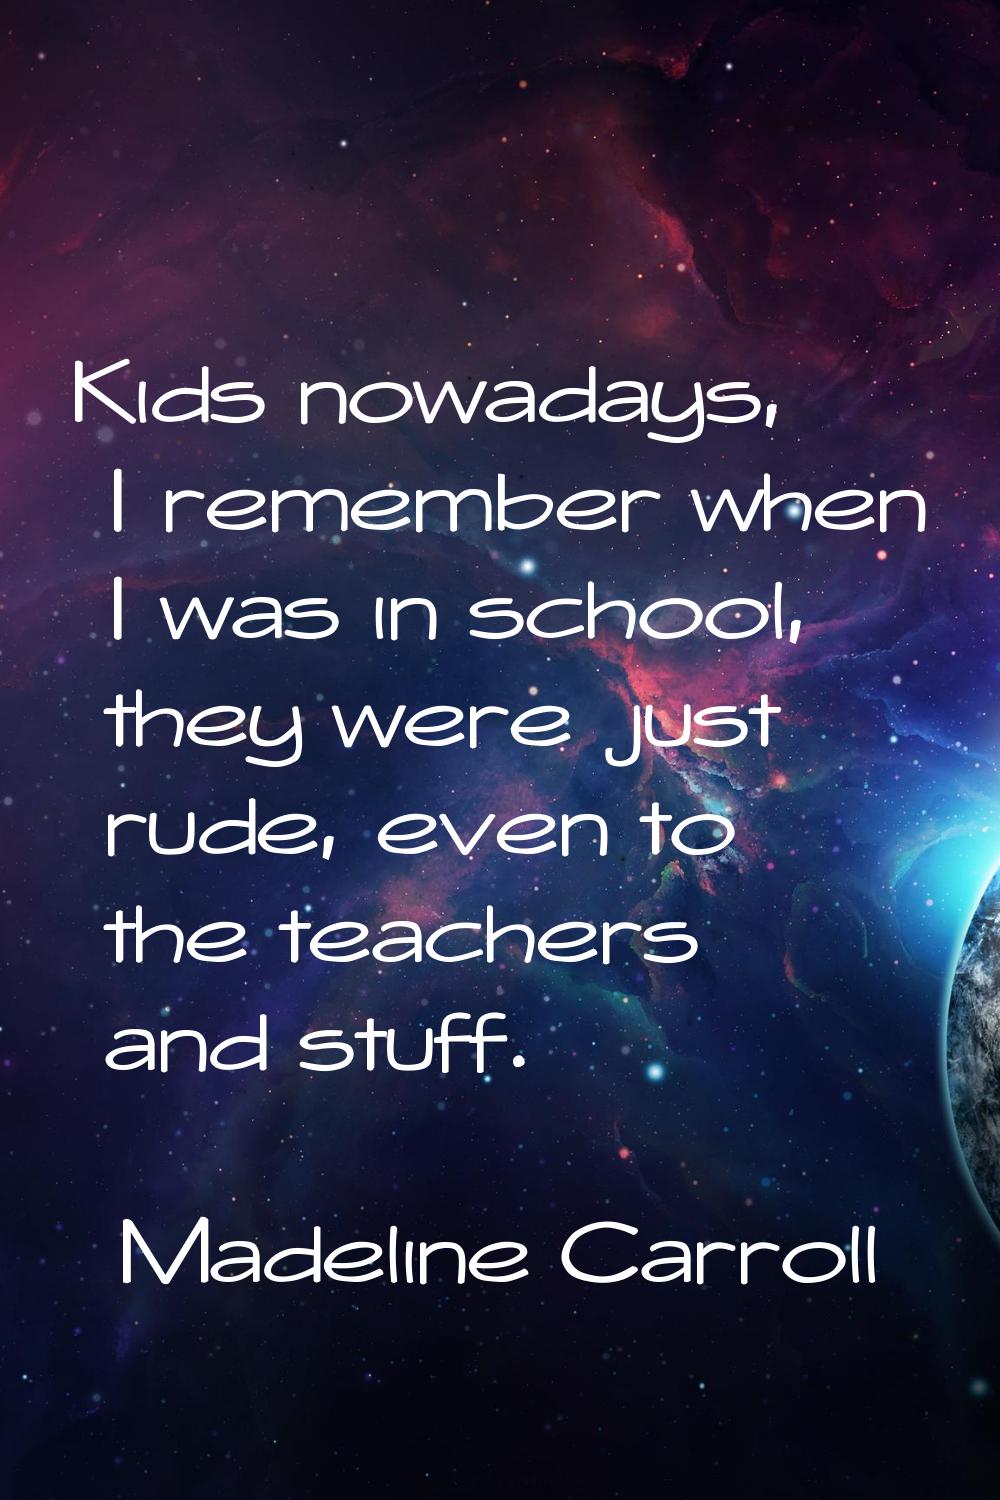 Kids nowadays, I remember when I was in school, they were just rude, even to the teachers and stuff